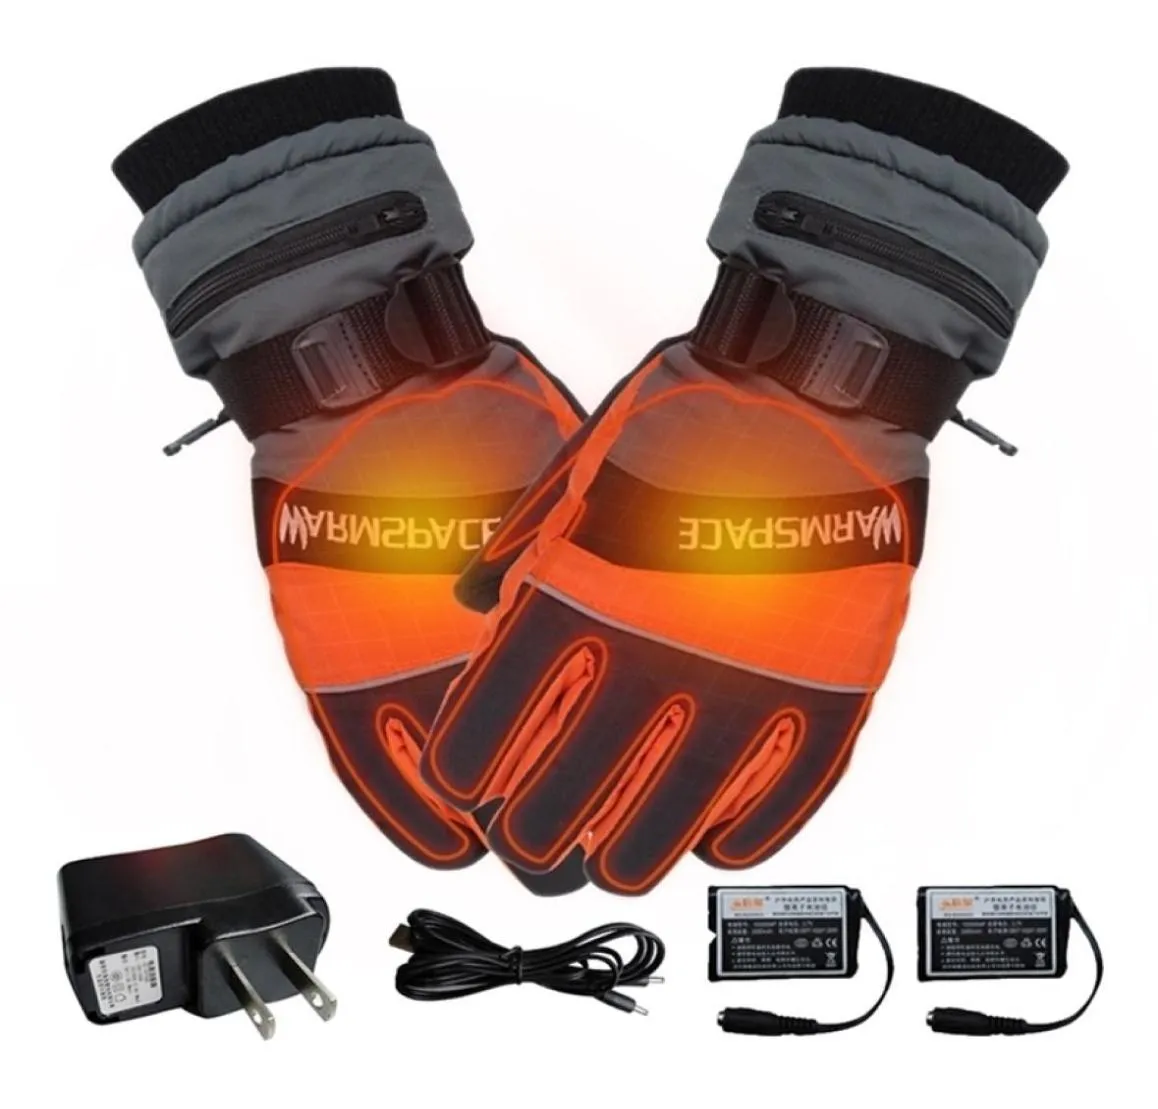 Electric Heated Gloves Windproof Cycling Warm Heating Touch Screen Skiing USB Powered For Hunting Fishing Motorcyc 2111248755911